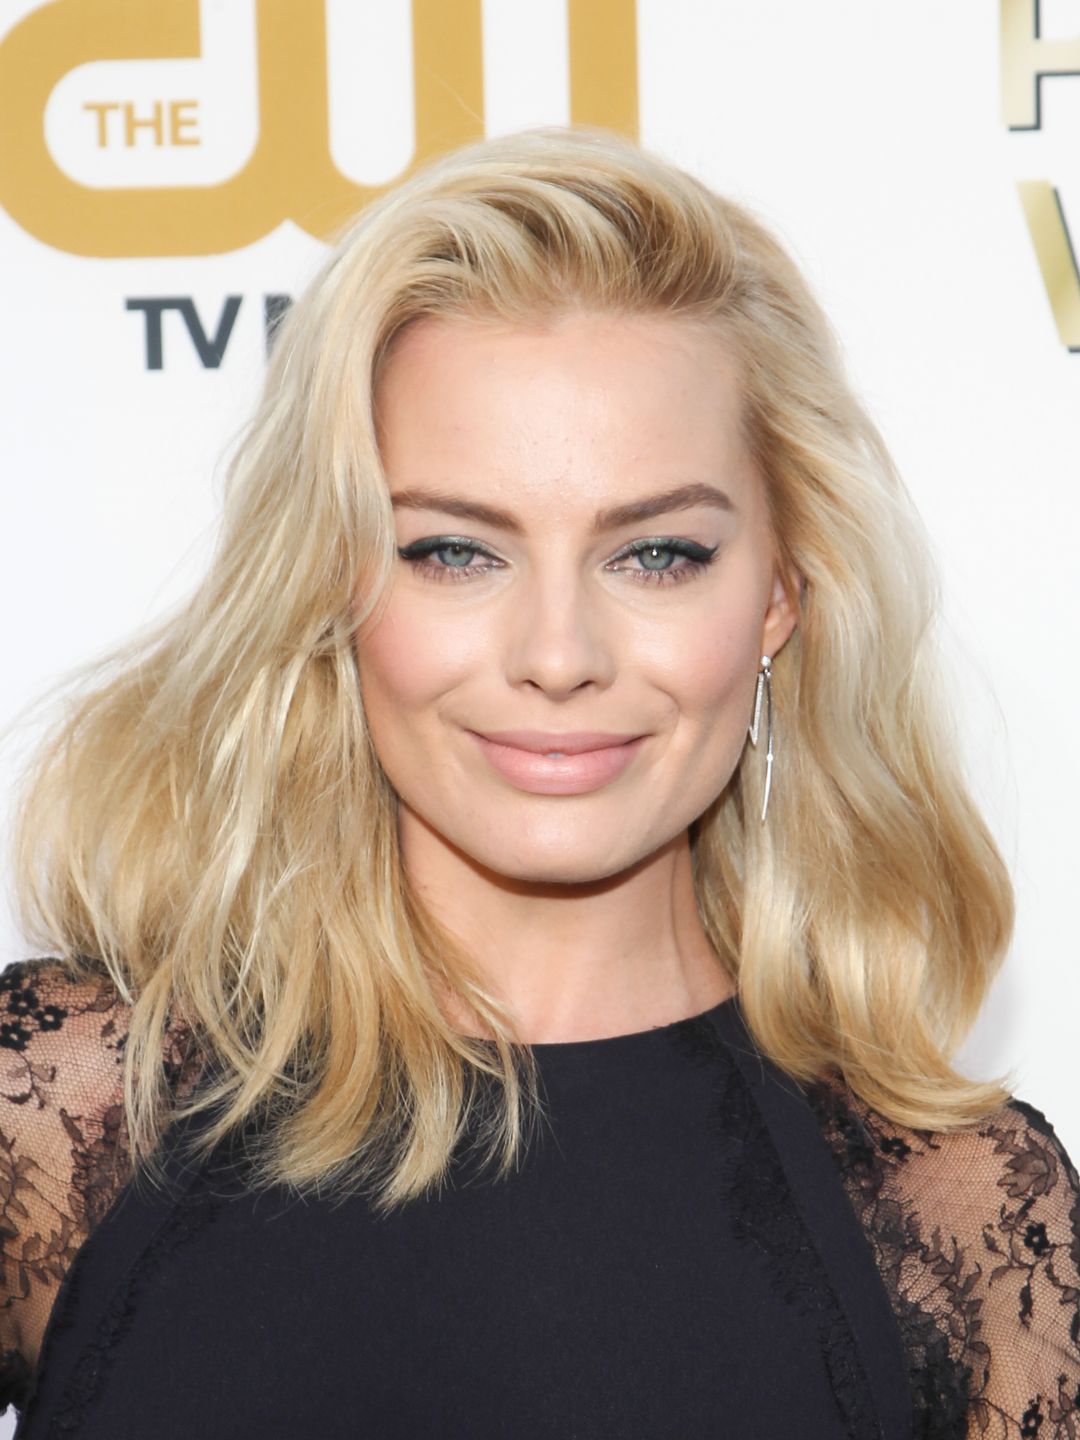 Margot Robbie how did she became famous